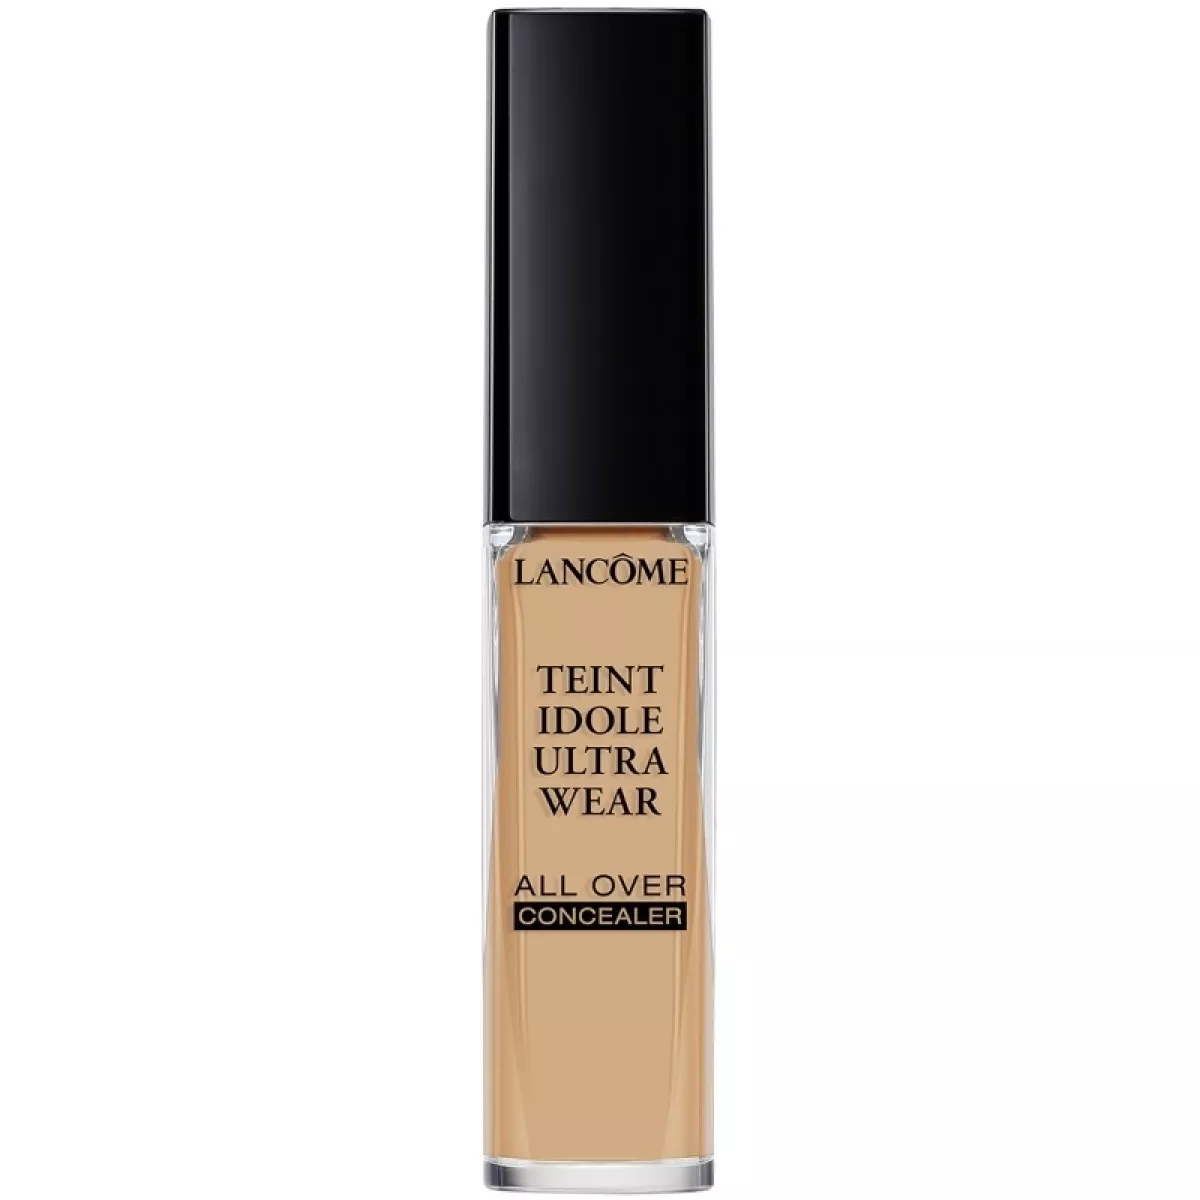 #3 - Lancome Teint Idole Ultra Wear All Over Concealer 13 ml - 051 Chataigne